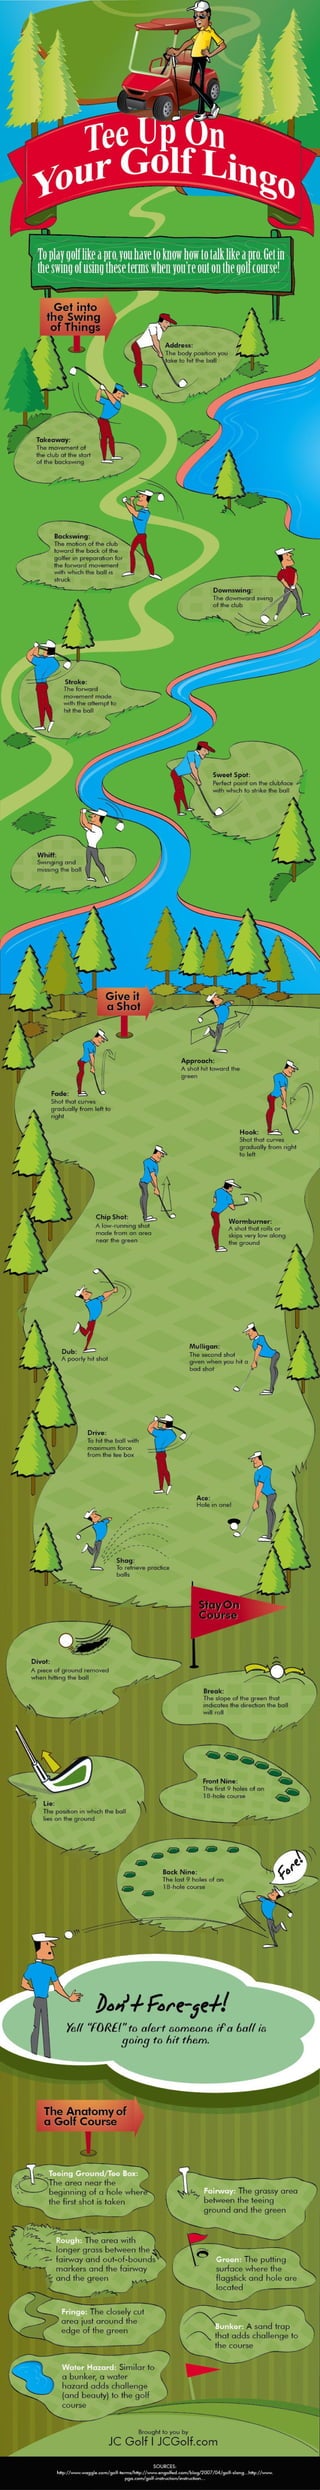 Tee Up On Your Golf Lingo